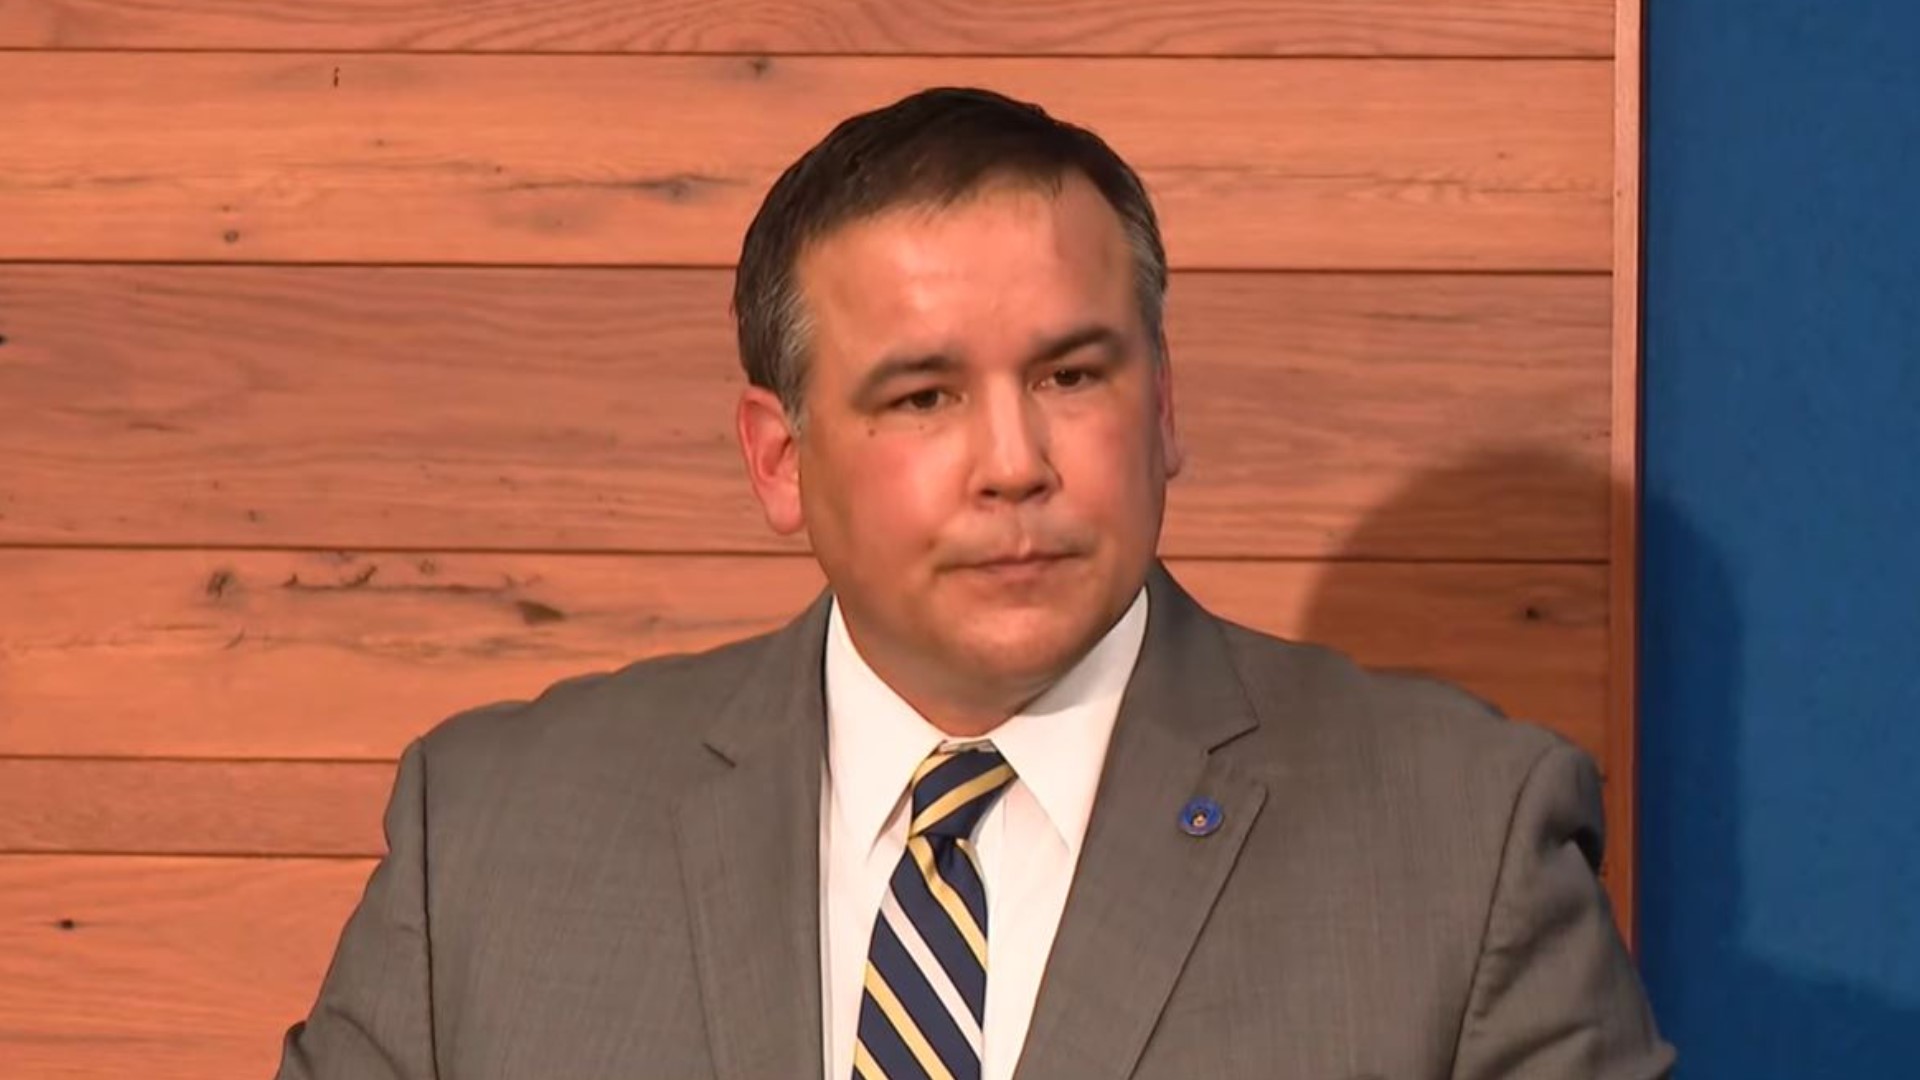 Columbus Mayor Andrew Ginther and other city and community leaders announced new and expanded programs to address the increased violence in the city.